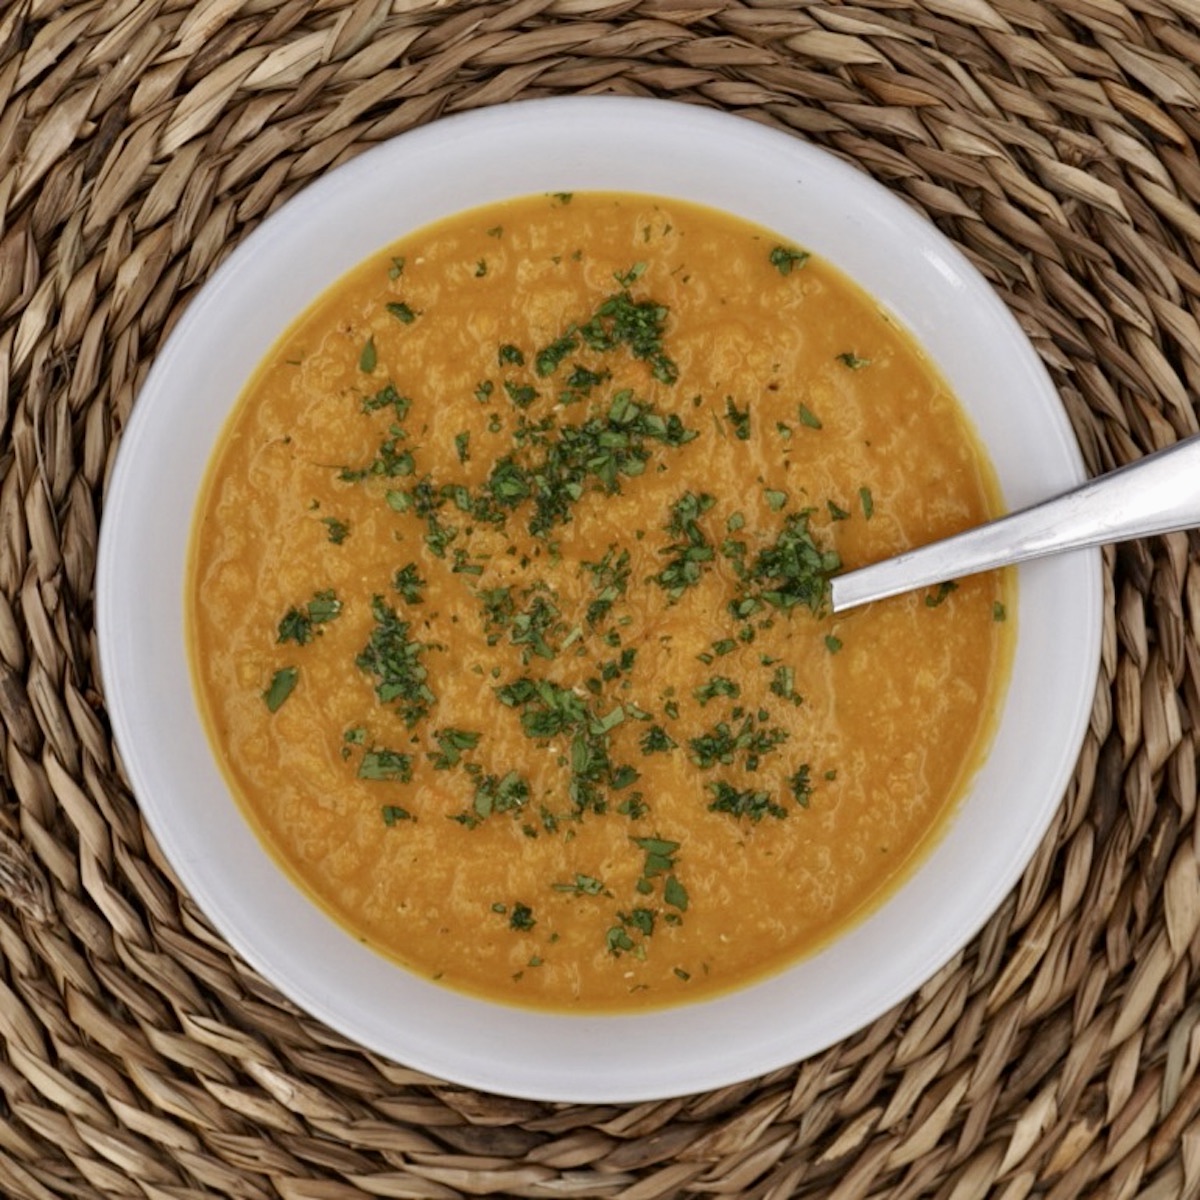 Overhead view of a bowl of spicy carrot and lentil soup.